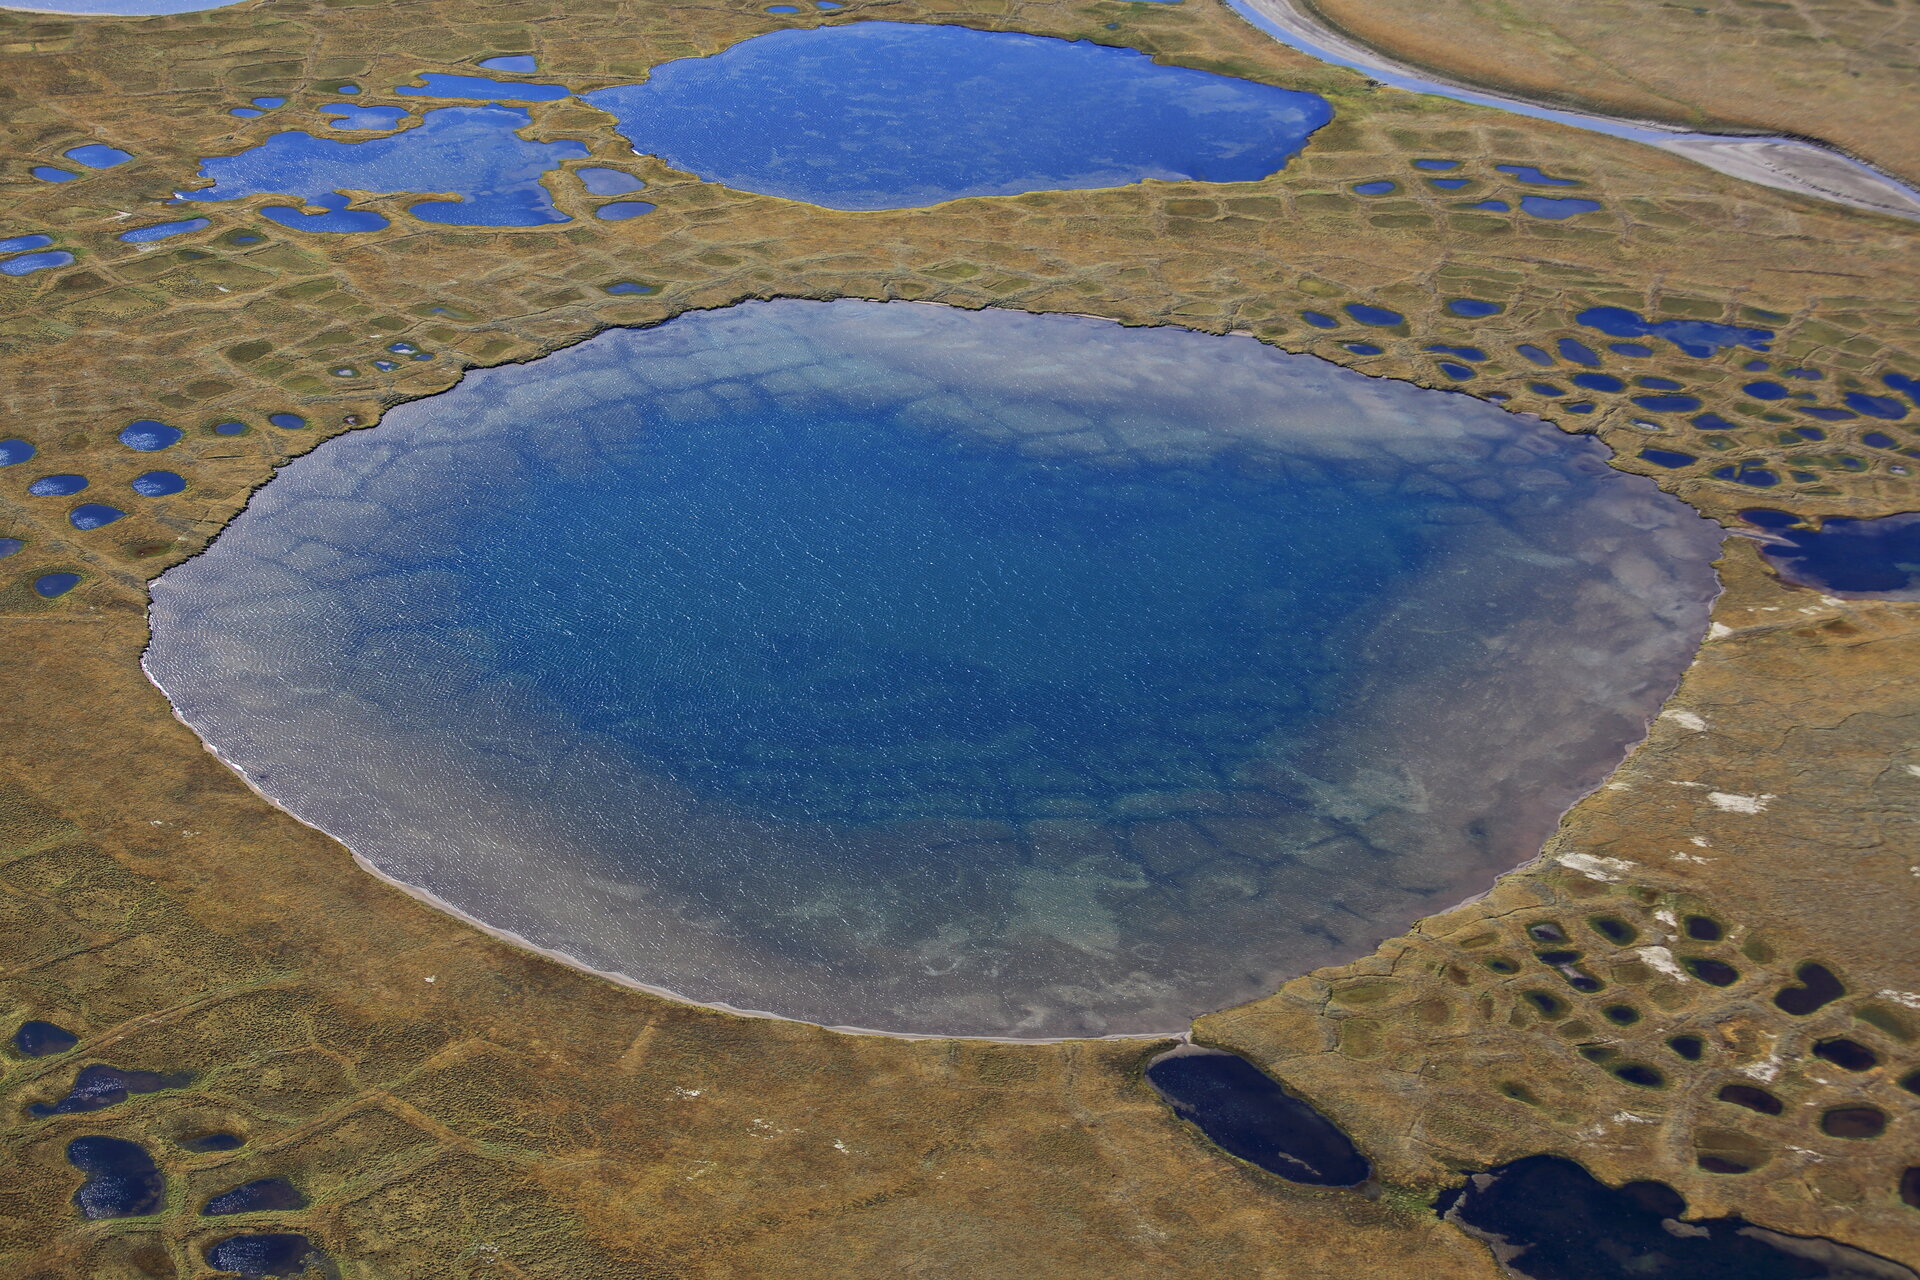 Thawing permafrost 